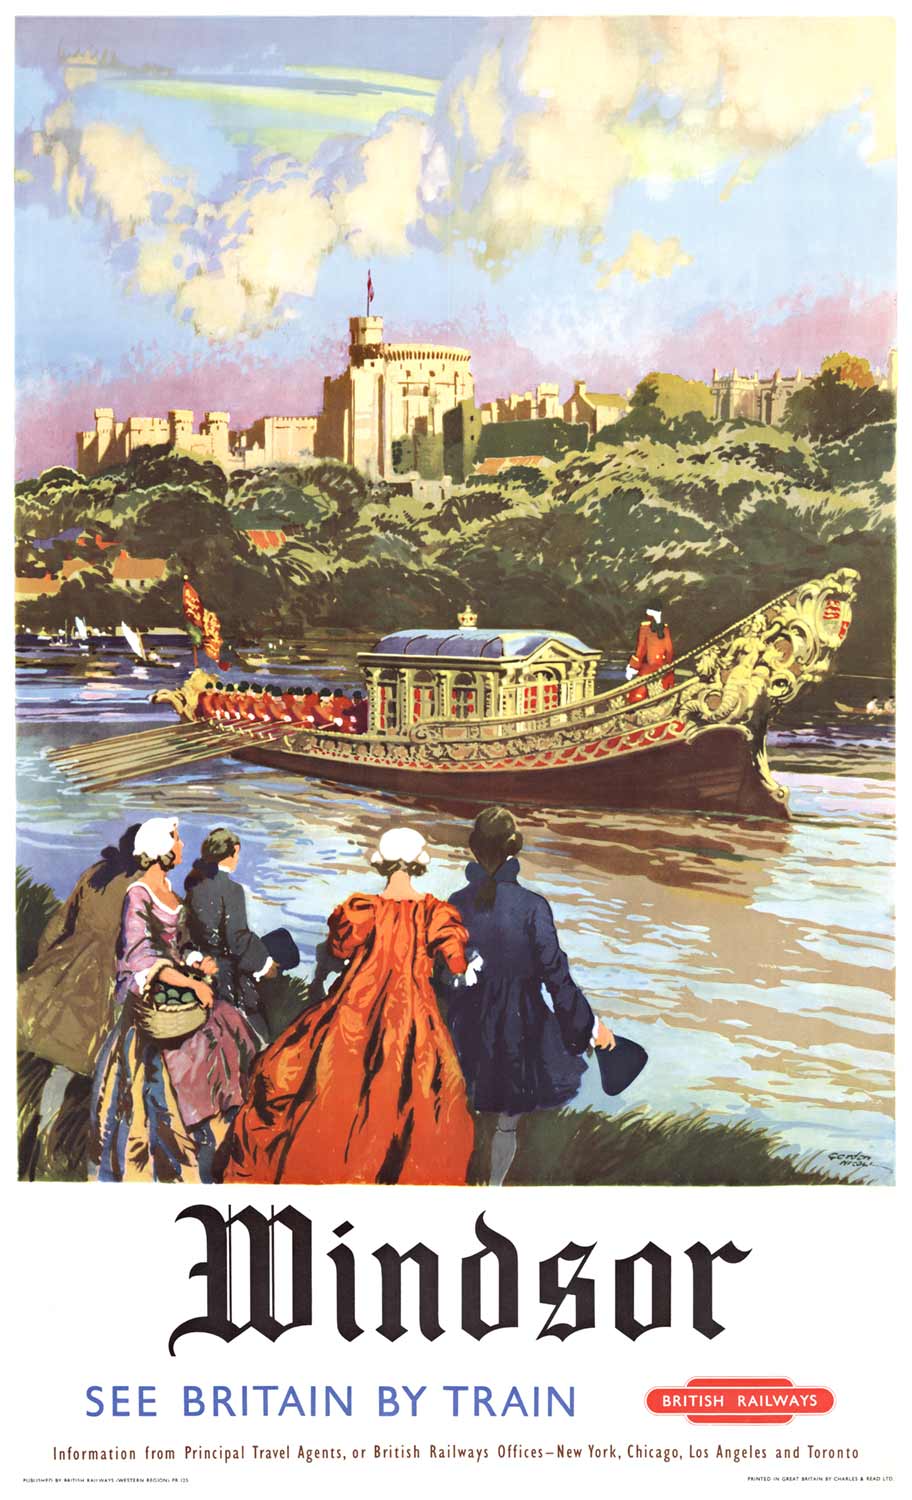 Originial linen backed British Railways antique travel poster. This poster produced for British Railways (Western Region) showing a royal barge on the River Thames at Windsor in Berkshire. In the foreground are people in restoration costume, with Windso